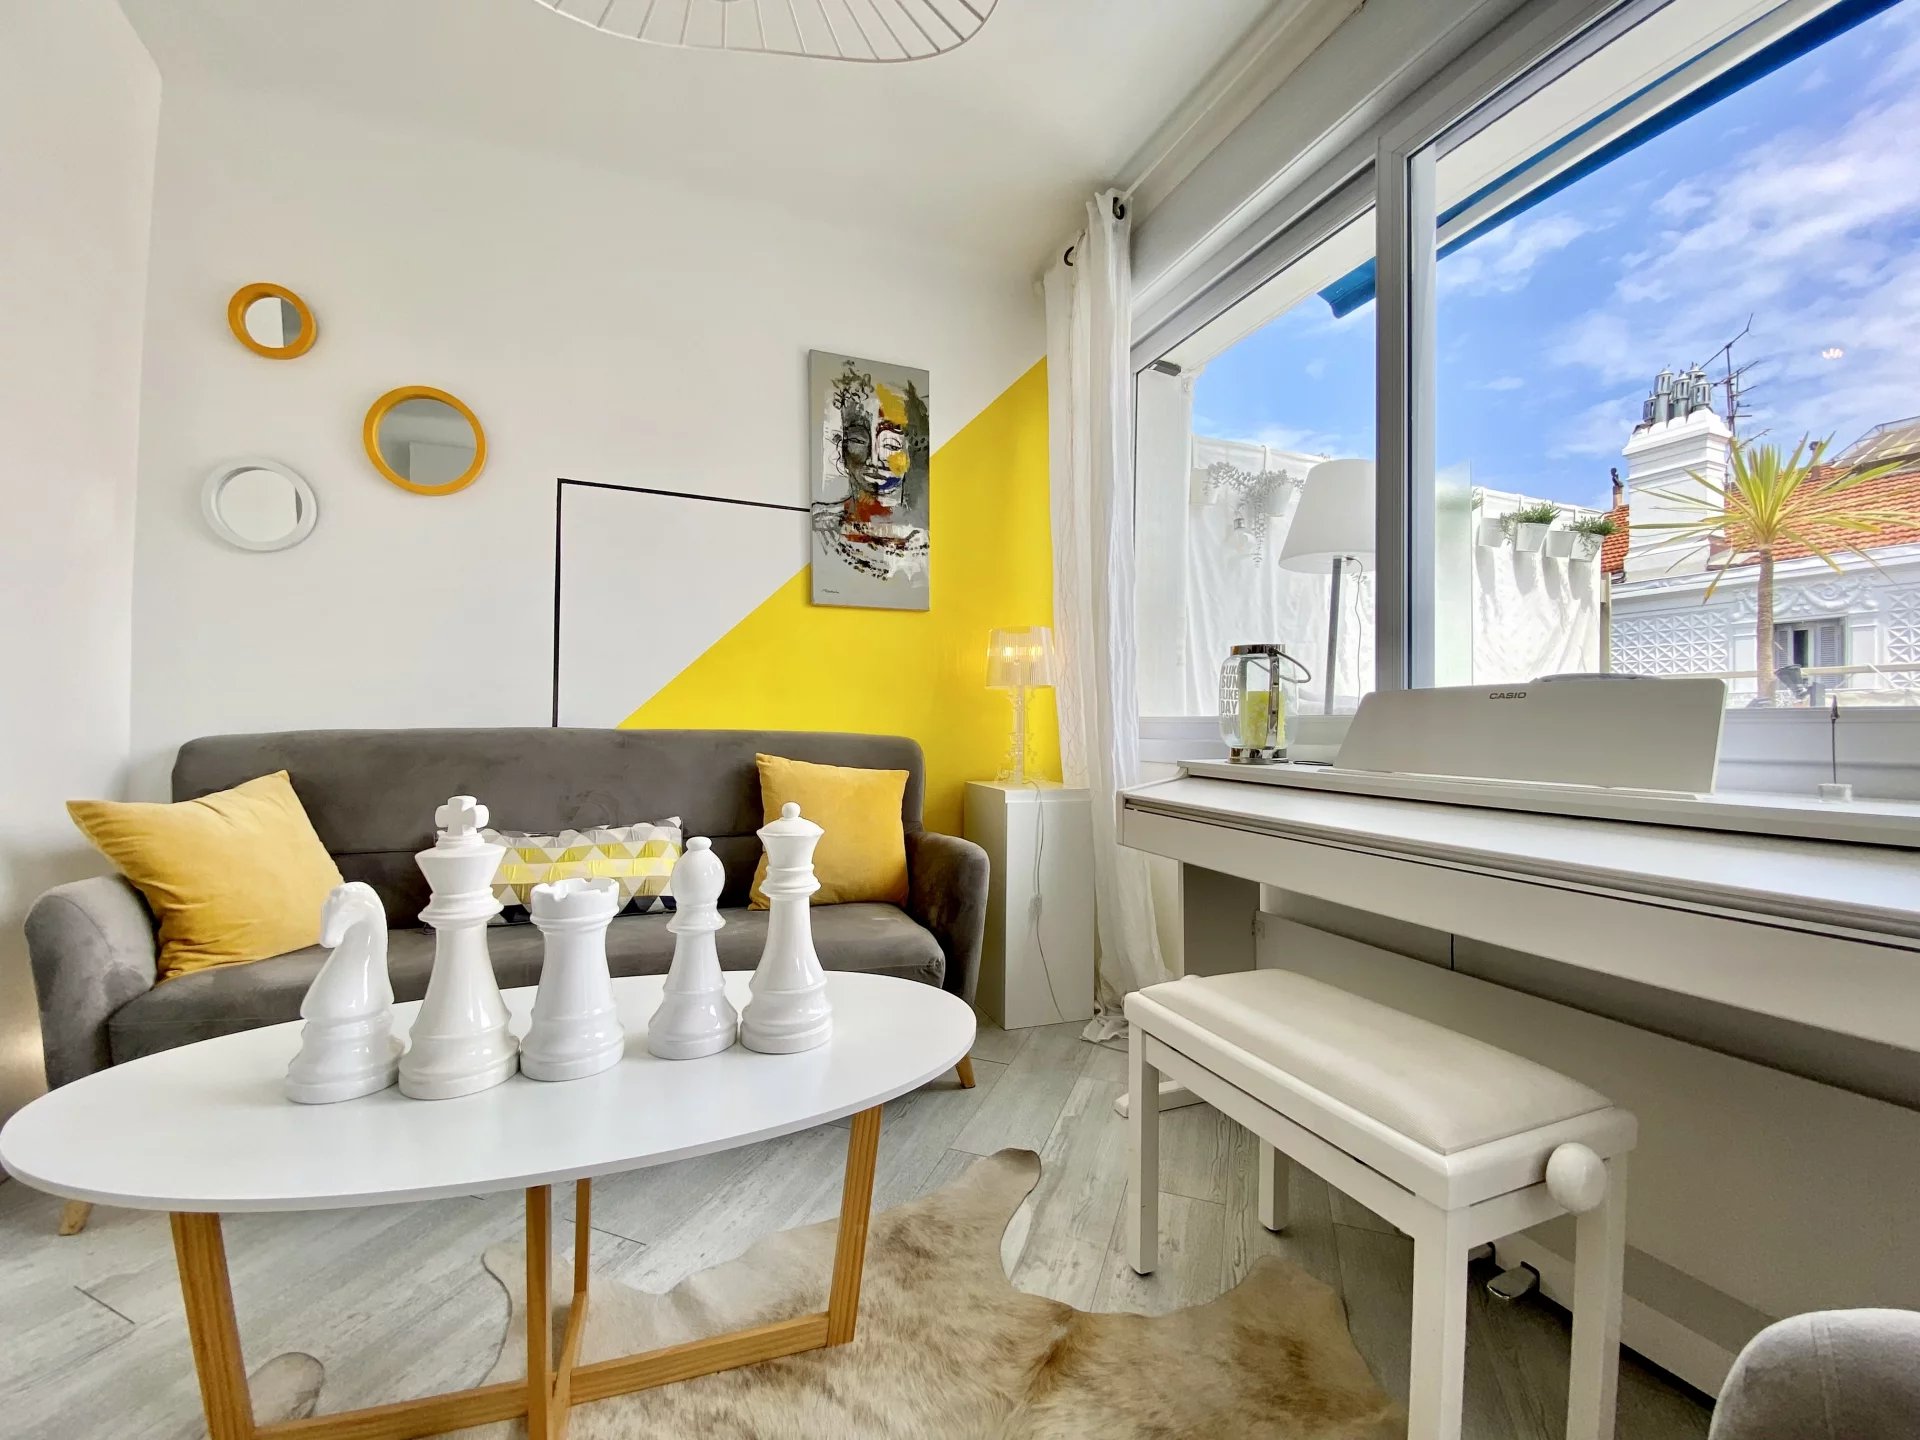 CANNES "BANANE": RARE 3room apartment on the upper floor with large terrace, lift and cellar